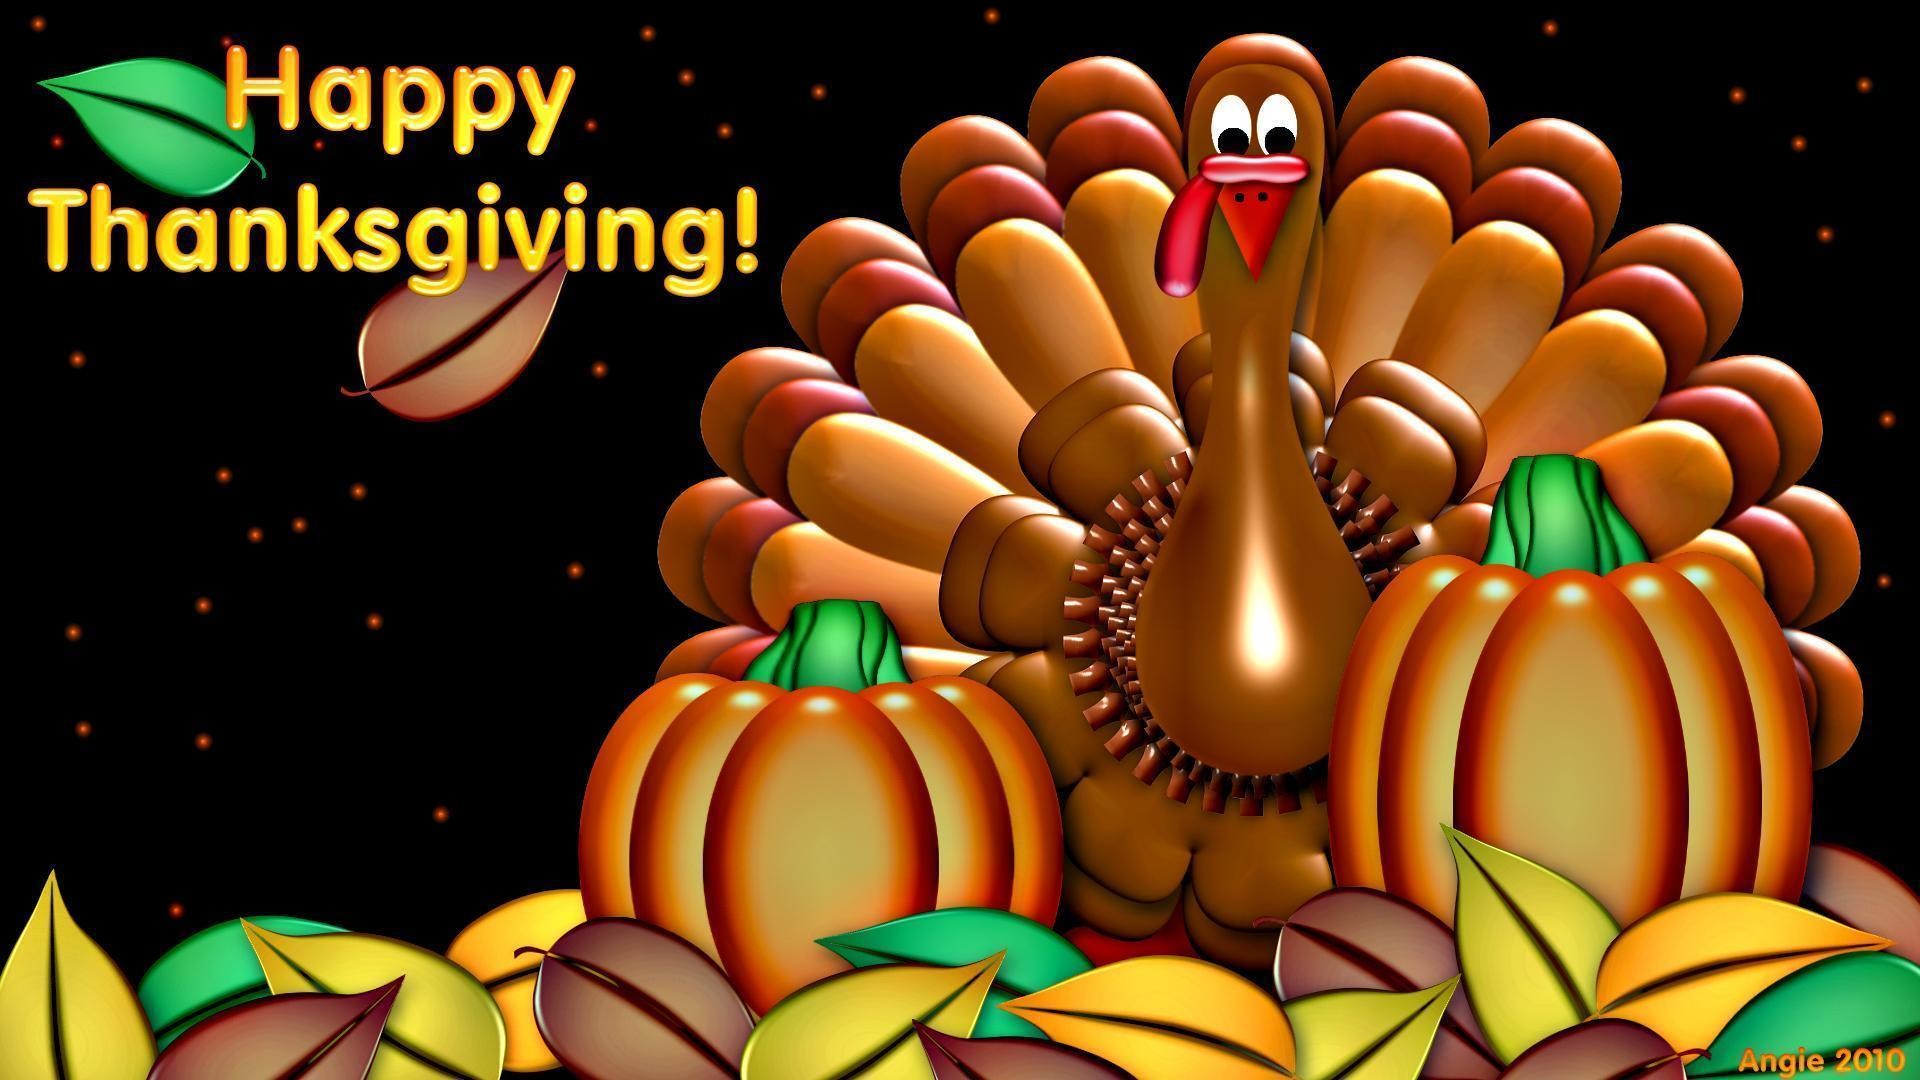 1920x1080 Top 15+ Images for Hd Wallpaper Thanksgiving Wallpaper | Image No: 04. File